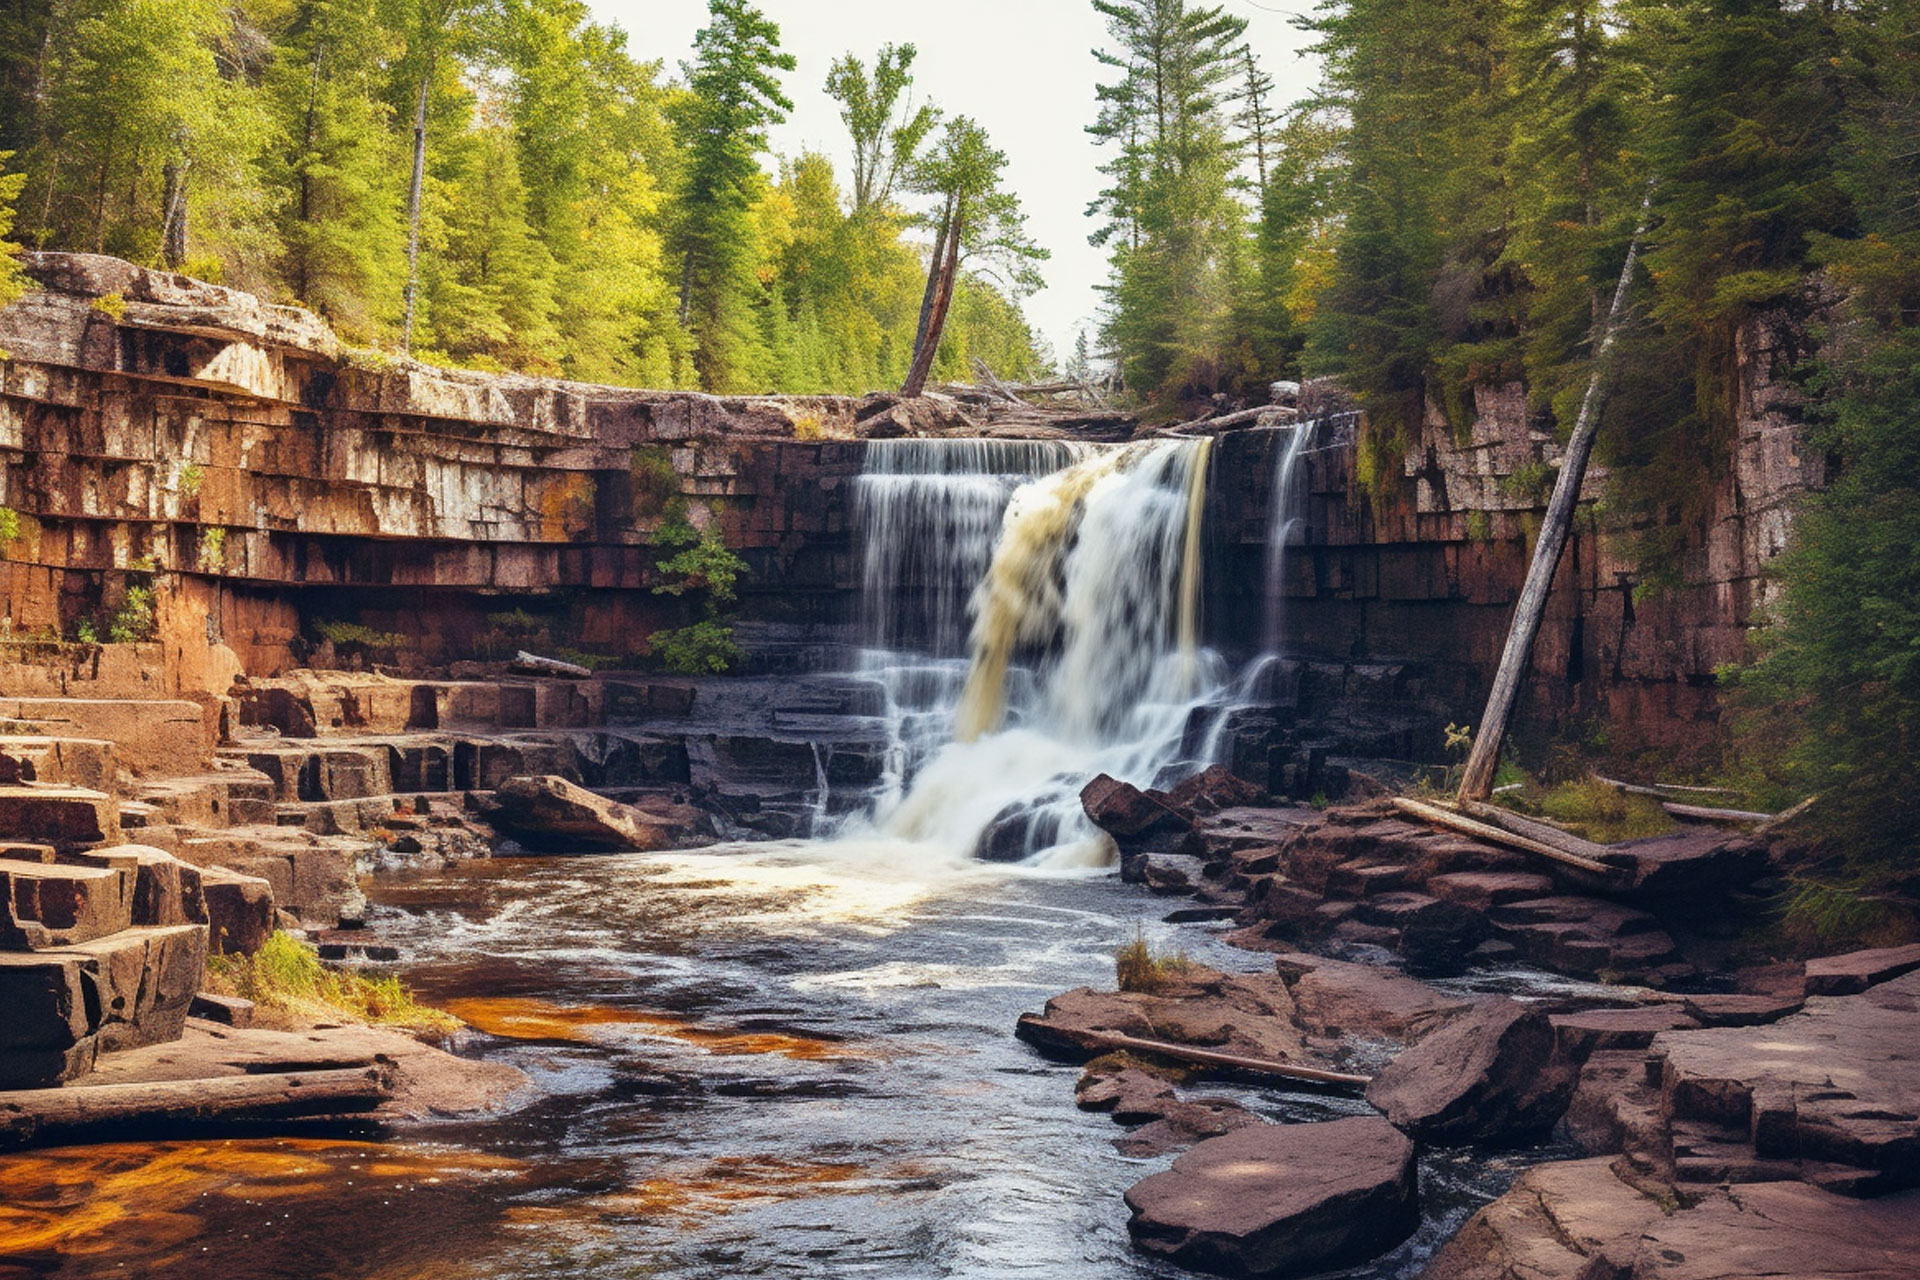 Amnicaon Falls State Park